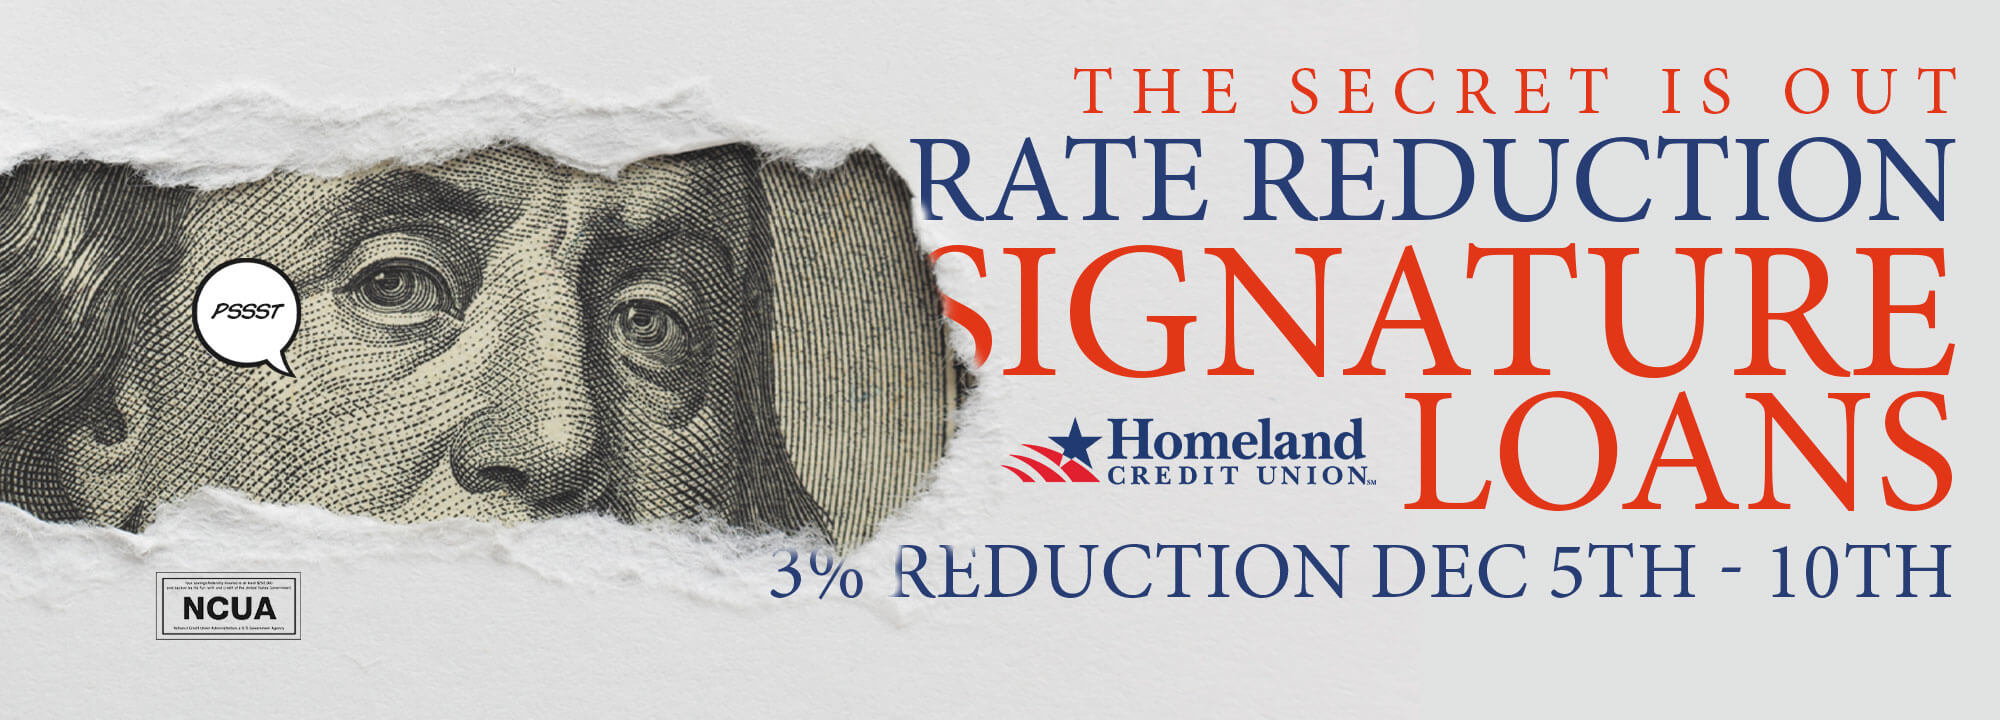 the secret is out. 3% rate reduction on signature loans December 5th-10th